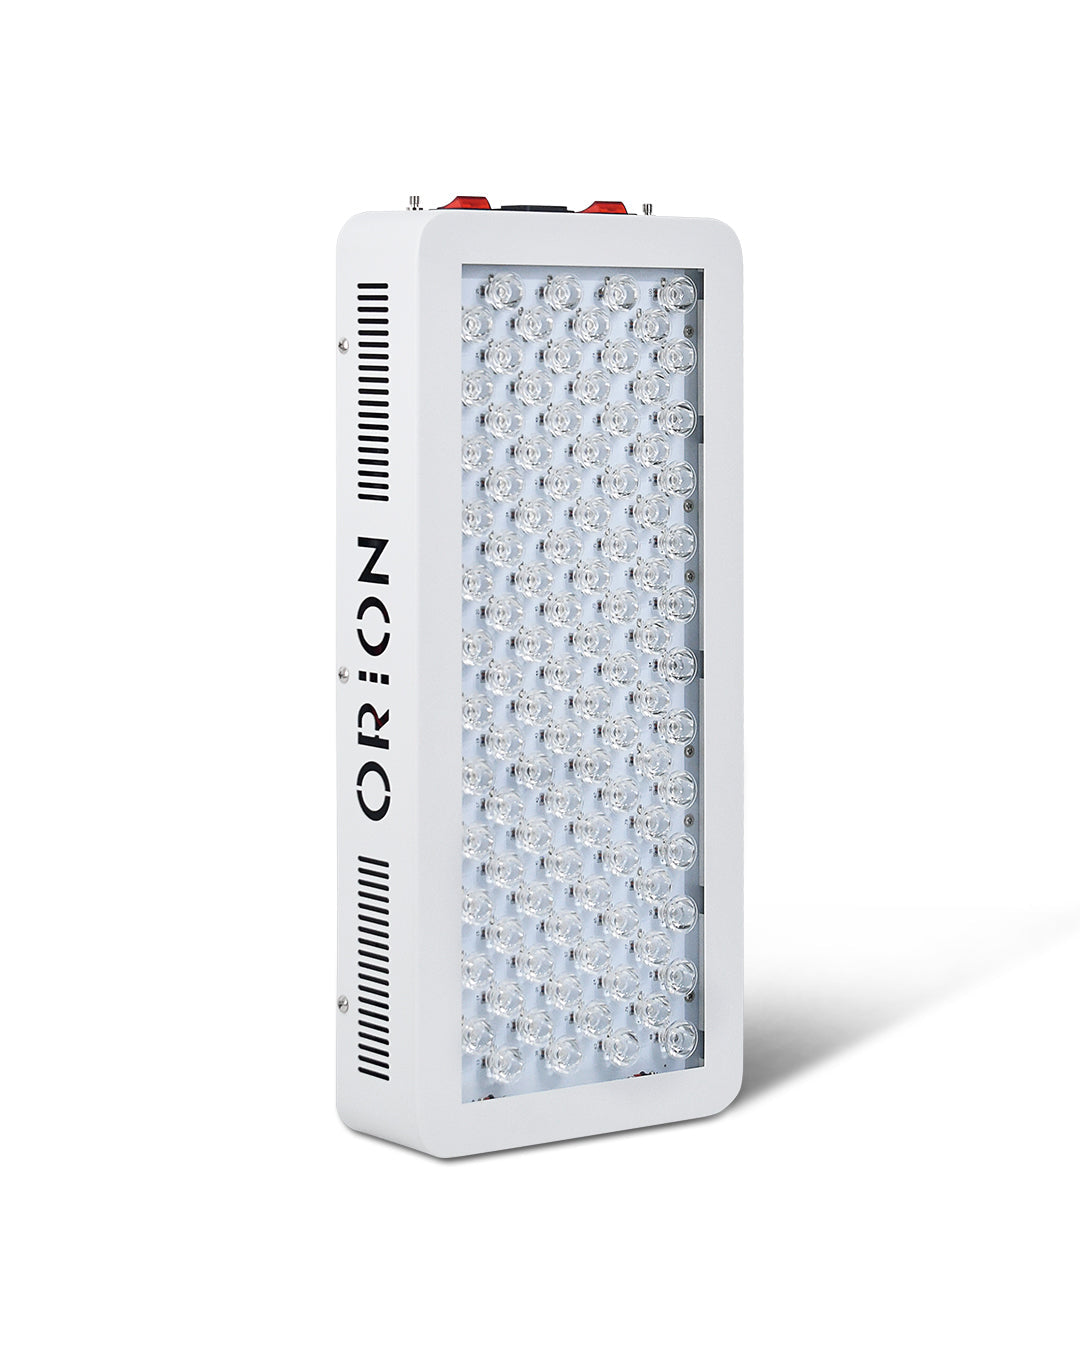 Orion 500. Orion Red Light Therapy. LED Light Therapy. Improves Collagen Production. Mitochondria. Muscle Recovery and Performance.